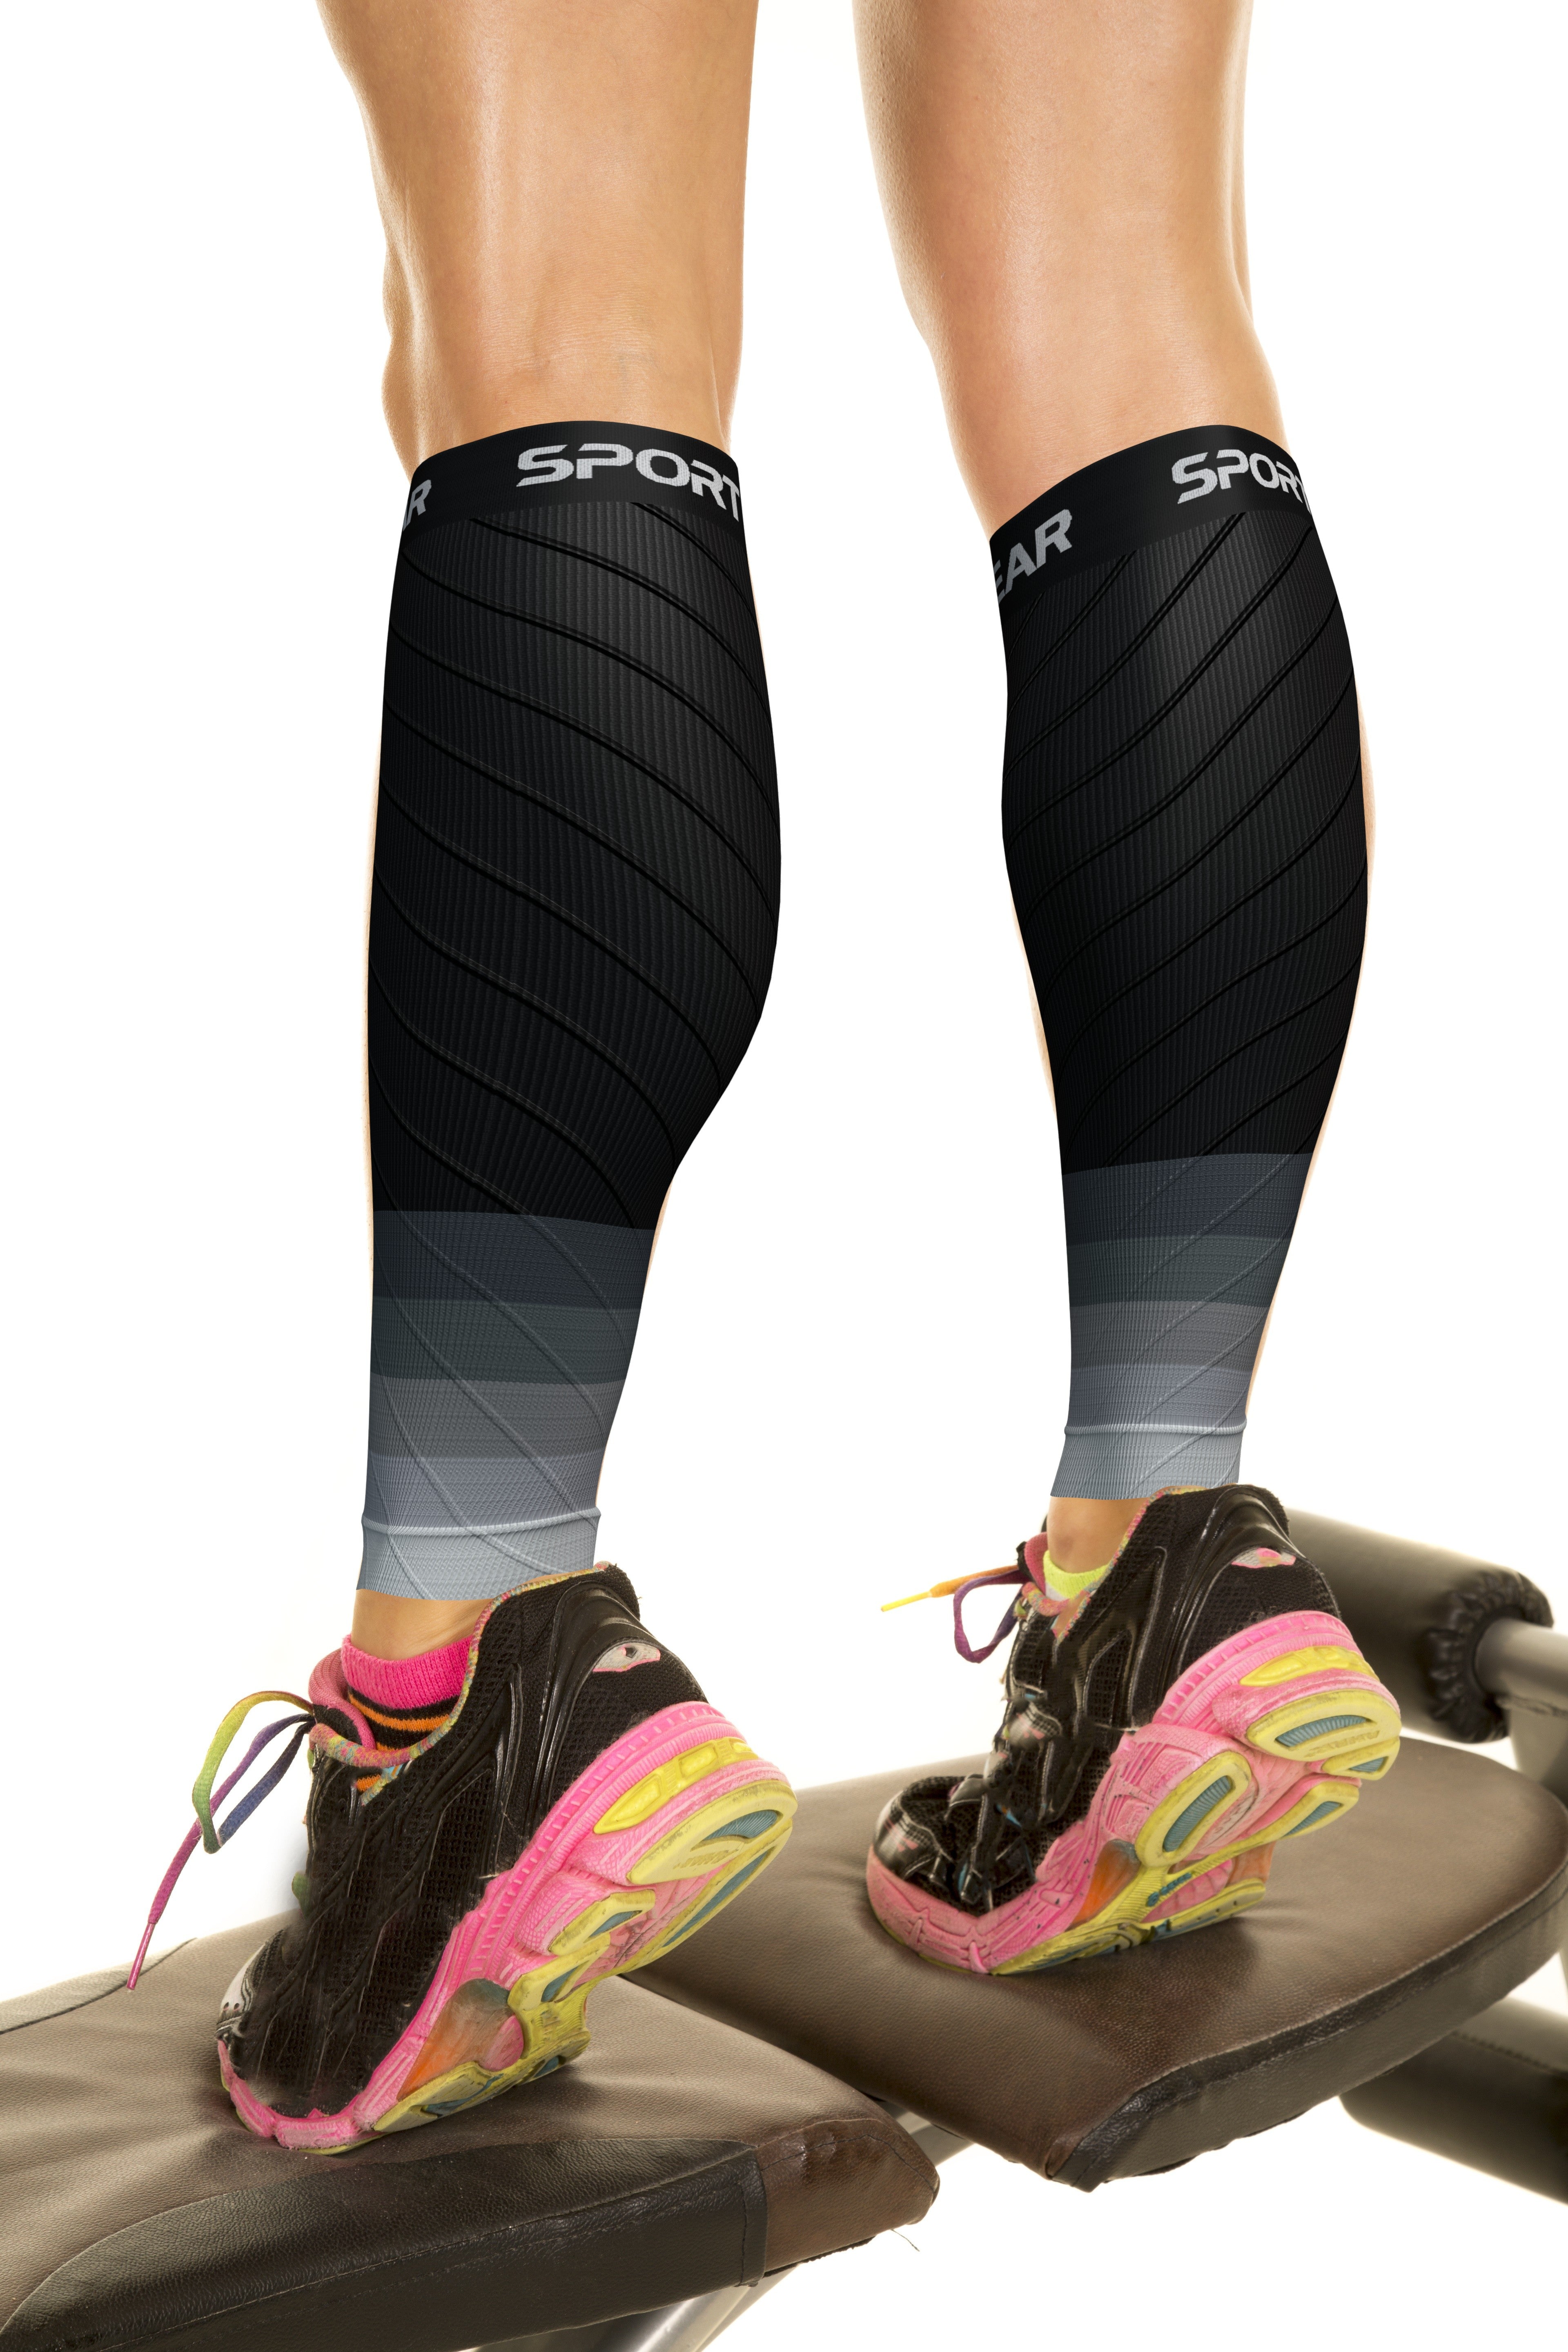 Calf Compression Sleeves - Supportive Legwear for Improved Circulation and Recovery - BLACK / GREY Color - L/XL Size